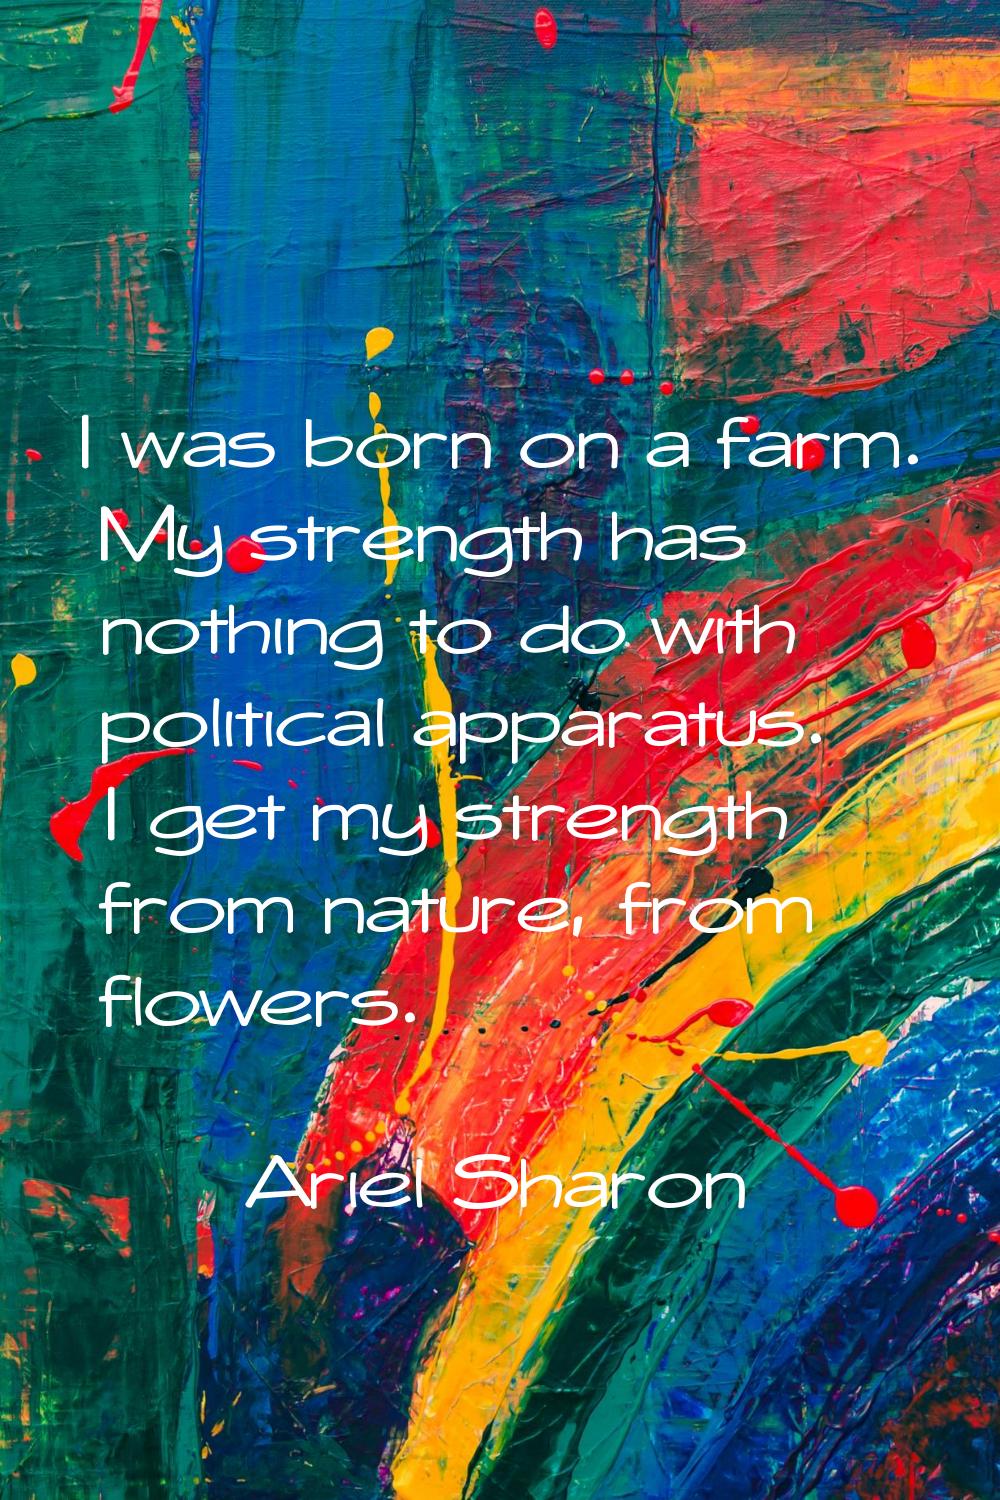 I was born on a farm. My strength has nothing to do with political apparatus. I get my strength fro